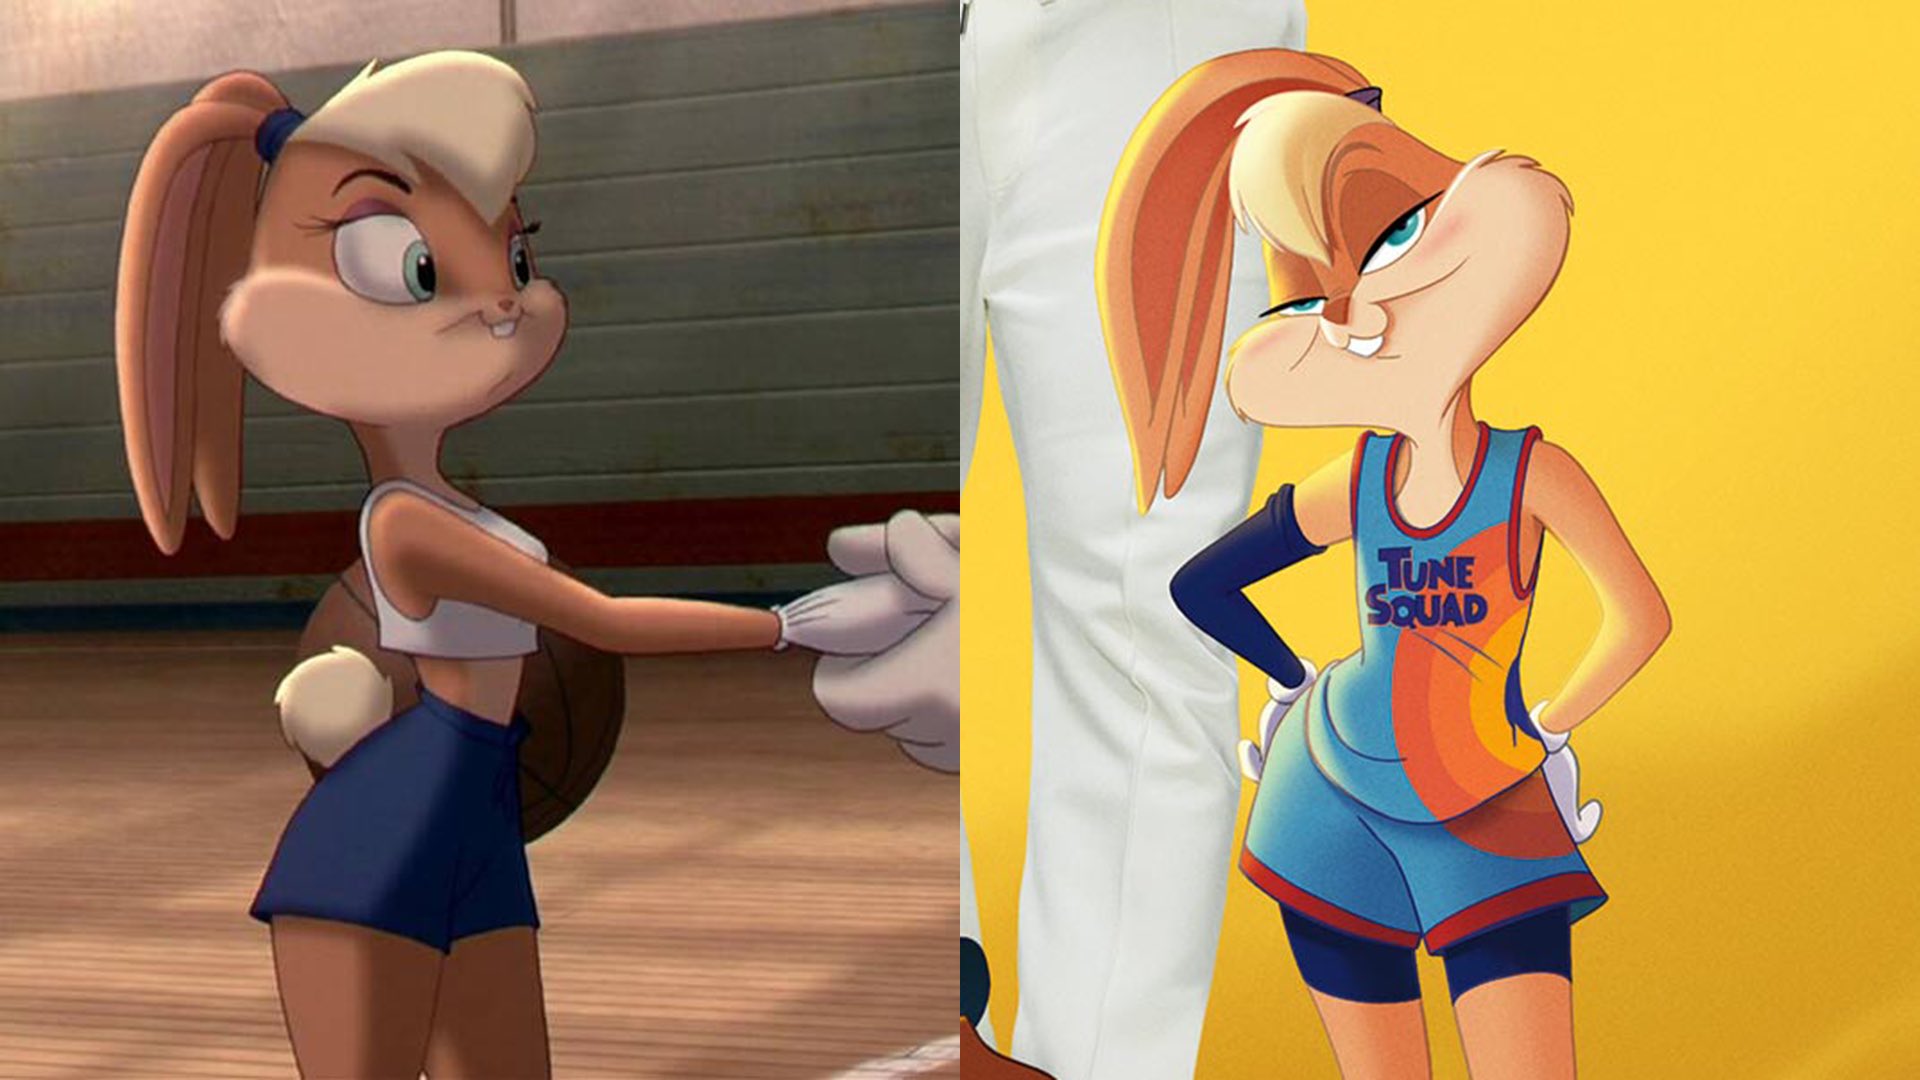 1. megan. they did lola bunny so dirty in space jam 2. 3 avr. 